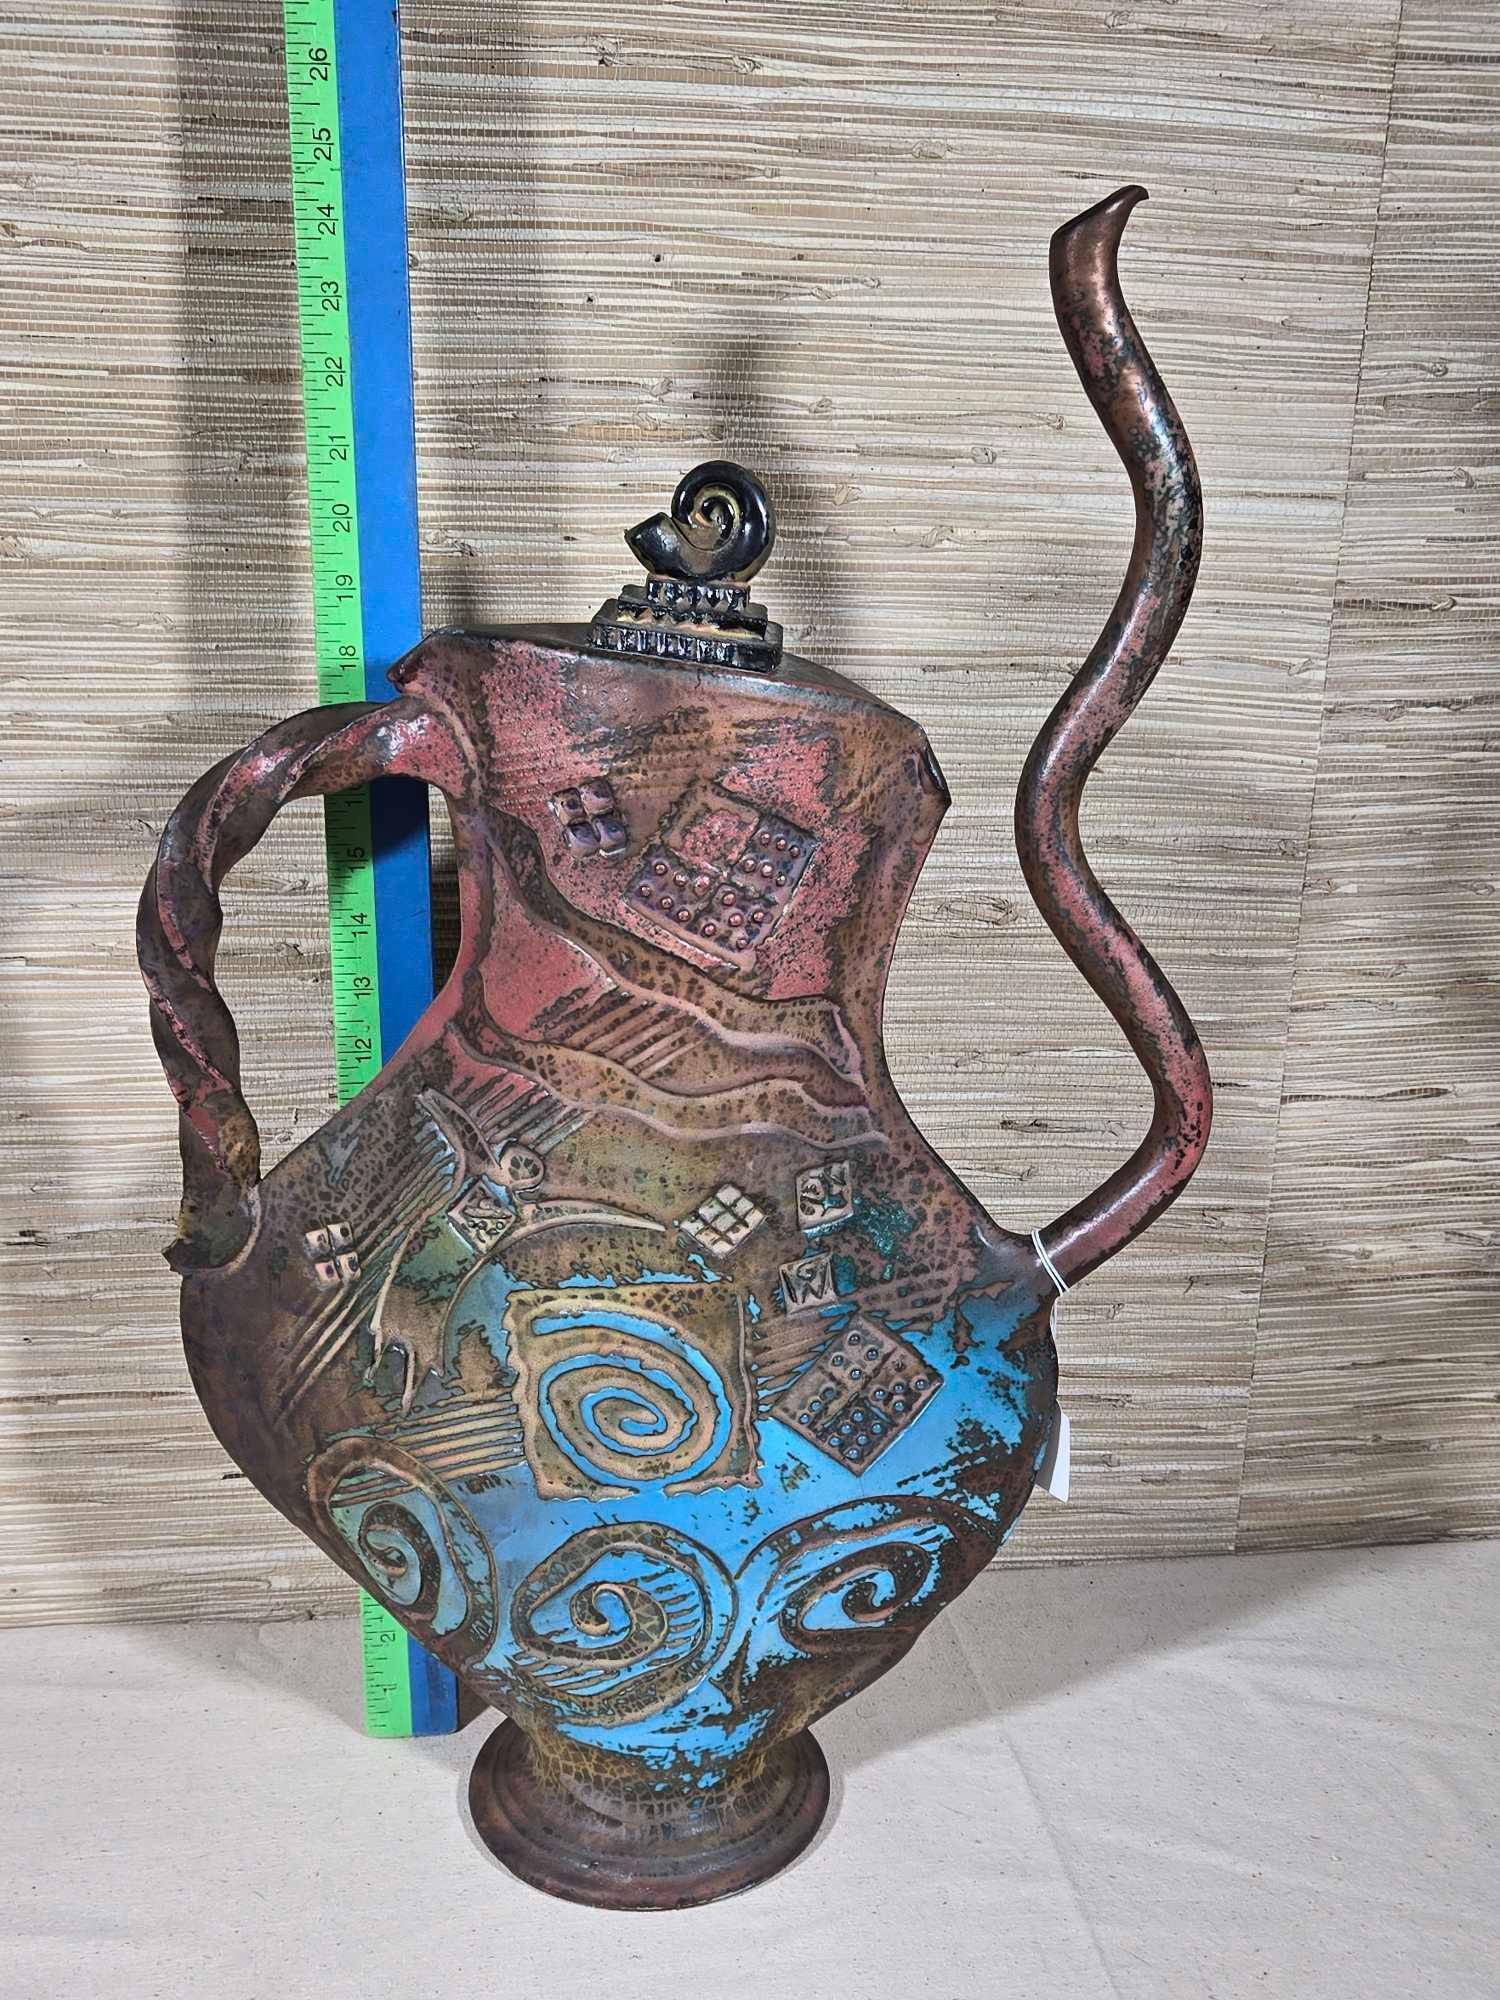 Fabulous Art Pottery Sculpture in the Form of a Teapot